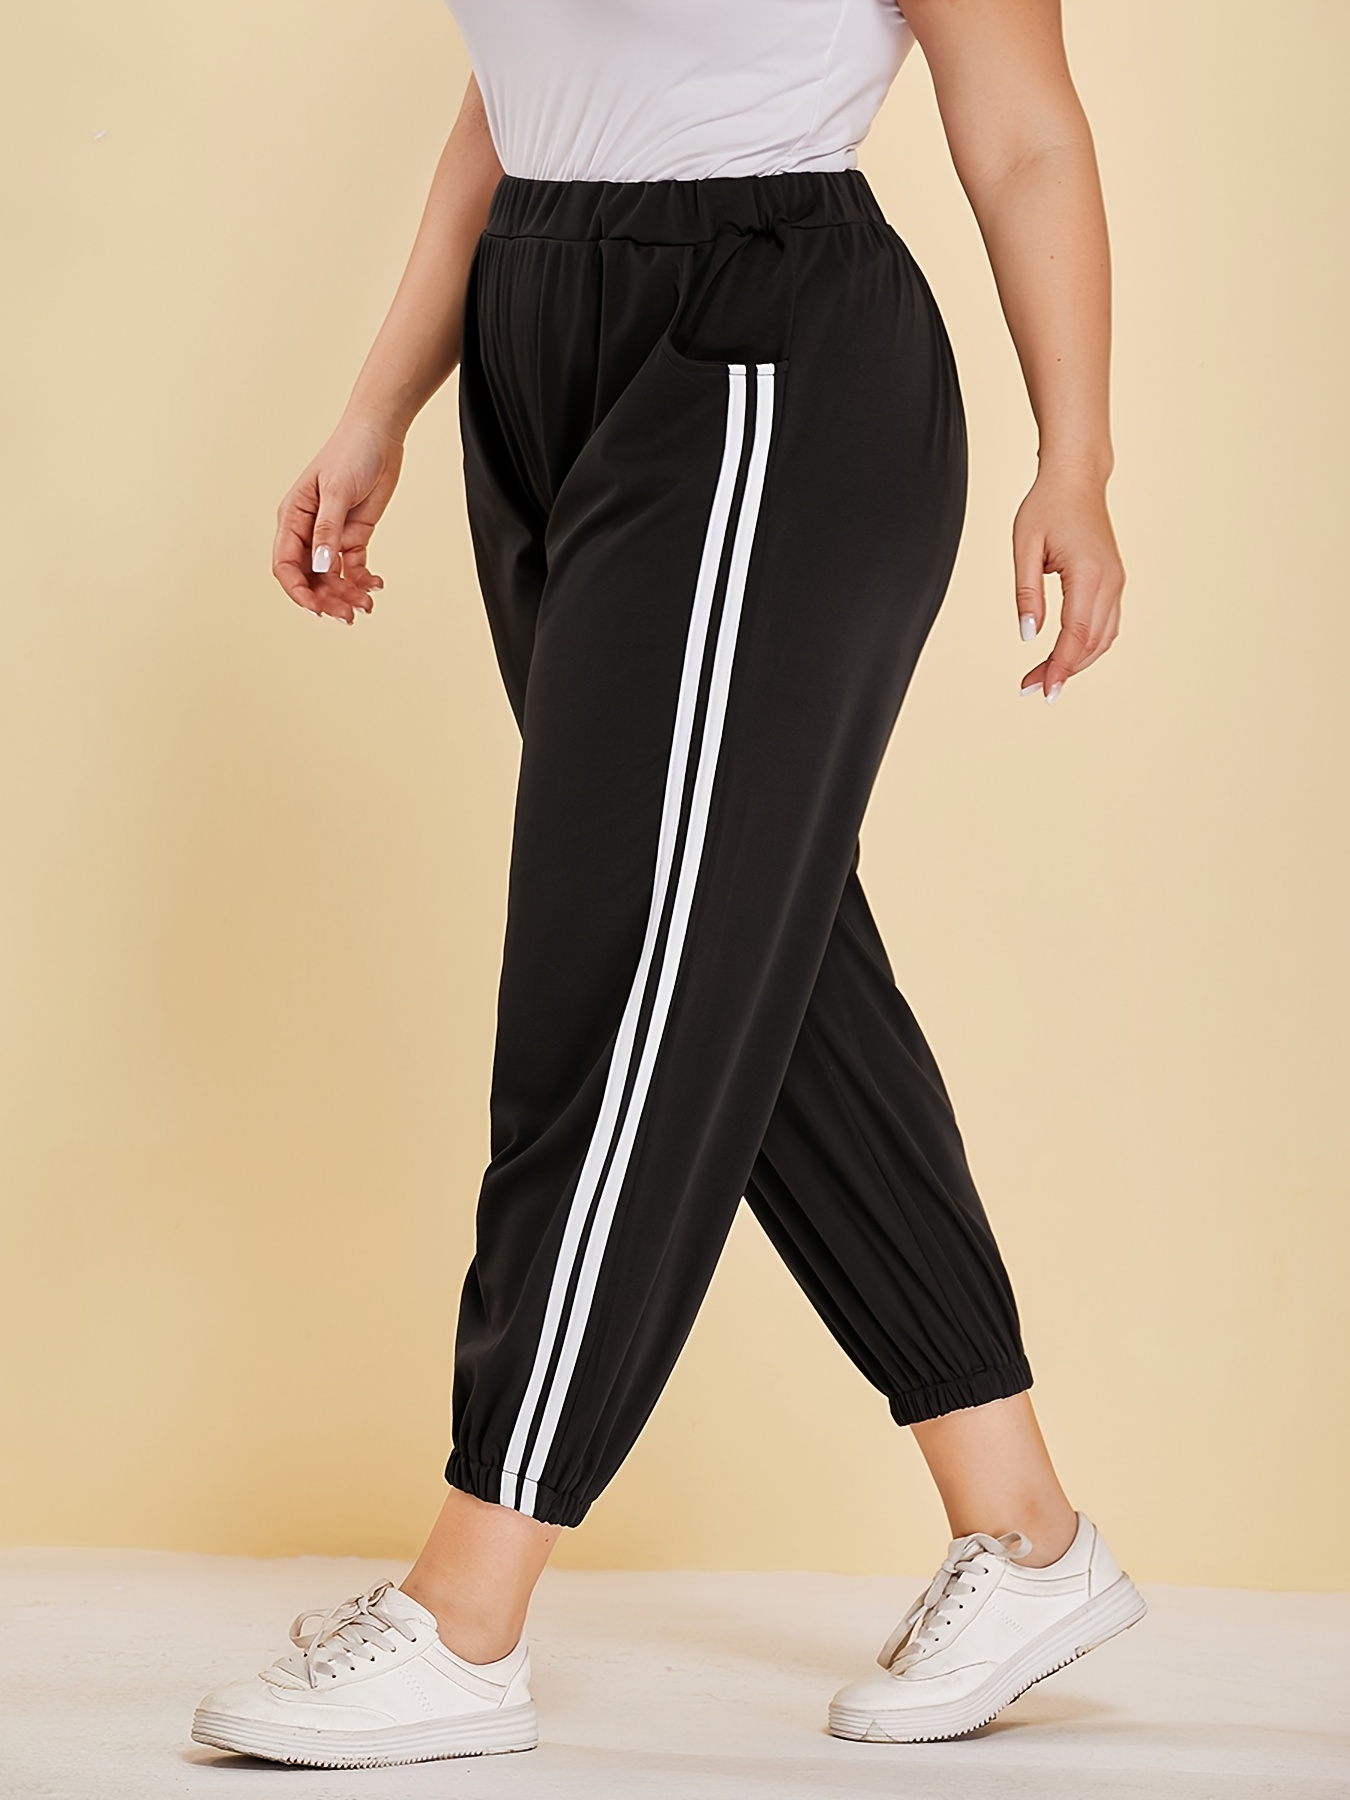 Women's Pants Trouser Slim Casual Cropped Paper Bag Waist Pants With  Pockets Yoga Pants for Women plus Size Boot Cut plus Size Exercise Clothes  for Women 